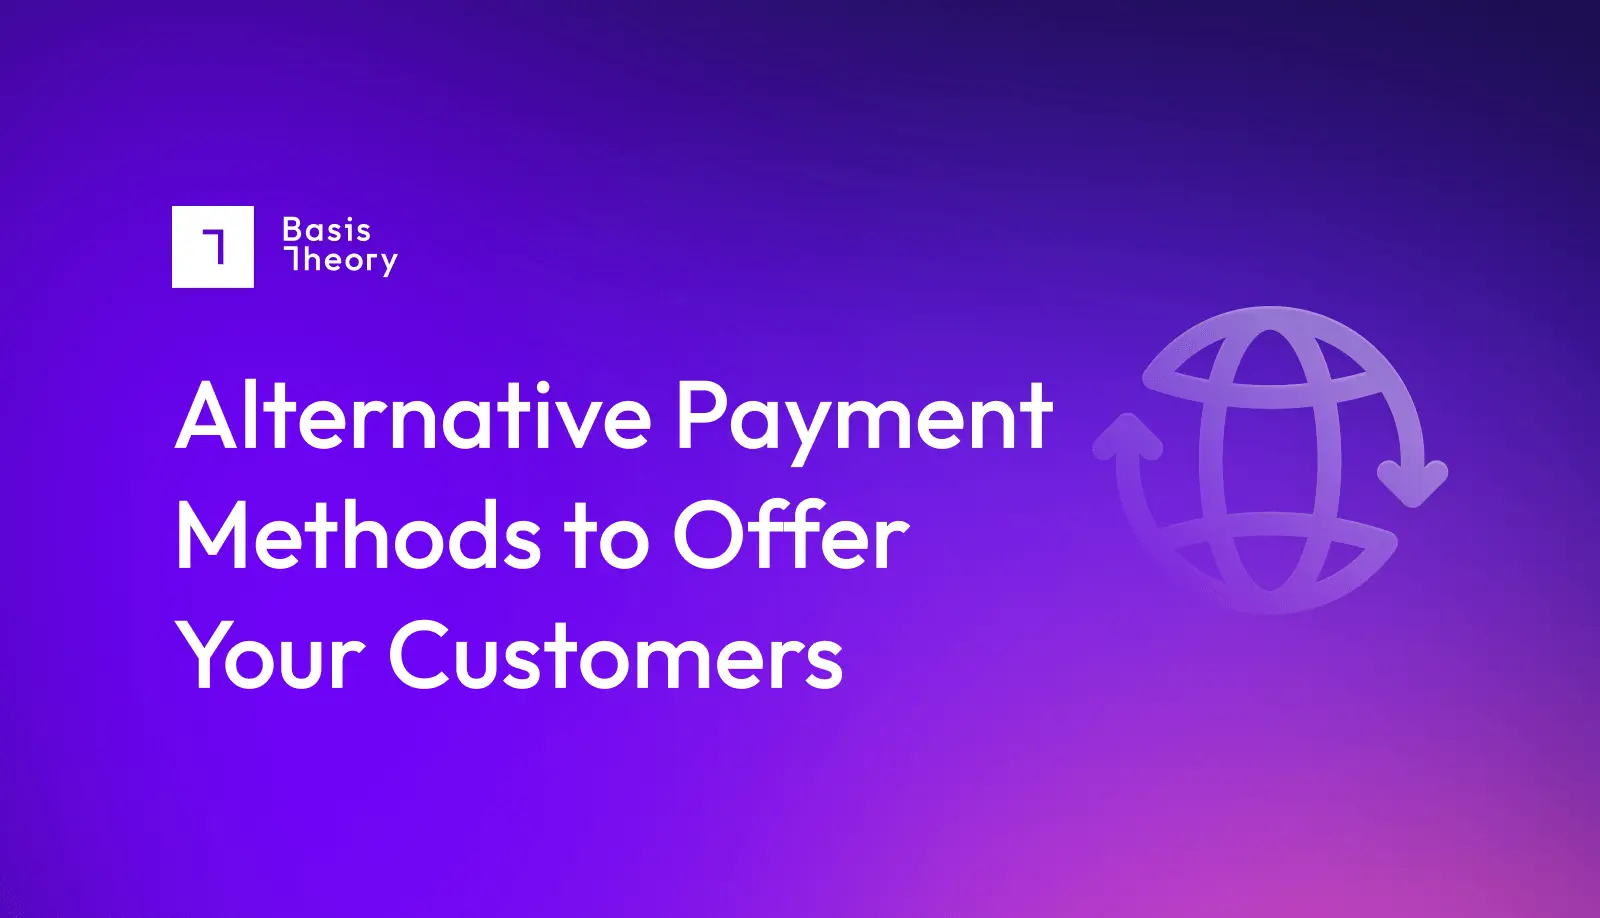 Alternative Payment Methods to Offer Customers